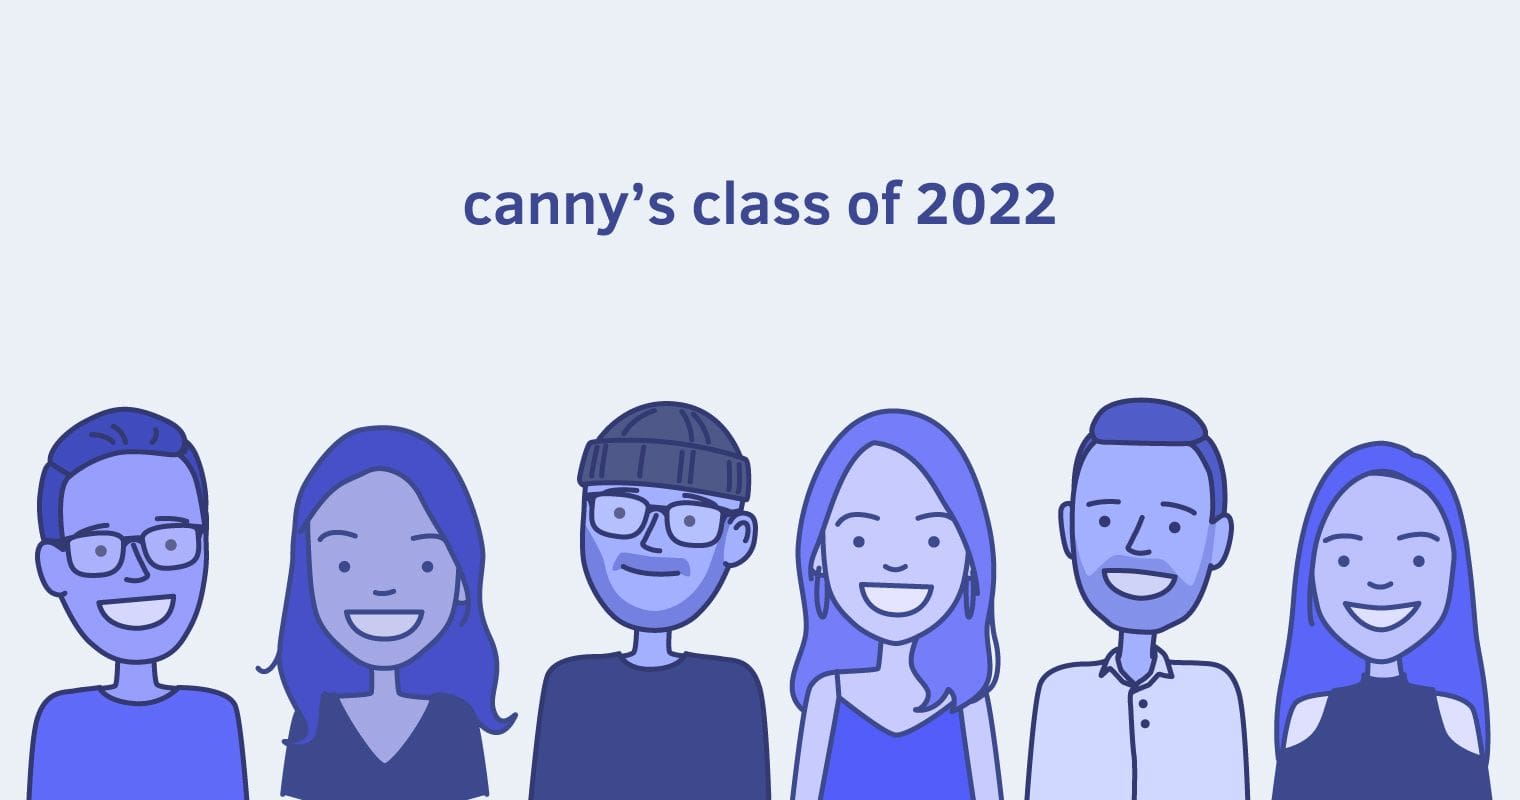 Meet Canny’s Class of 2022!